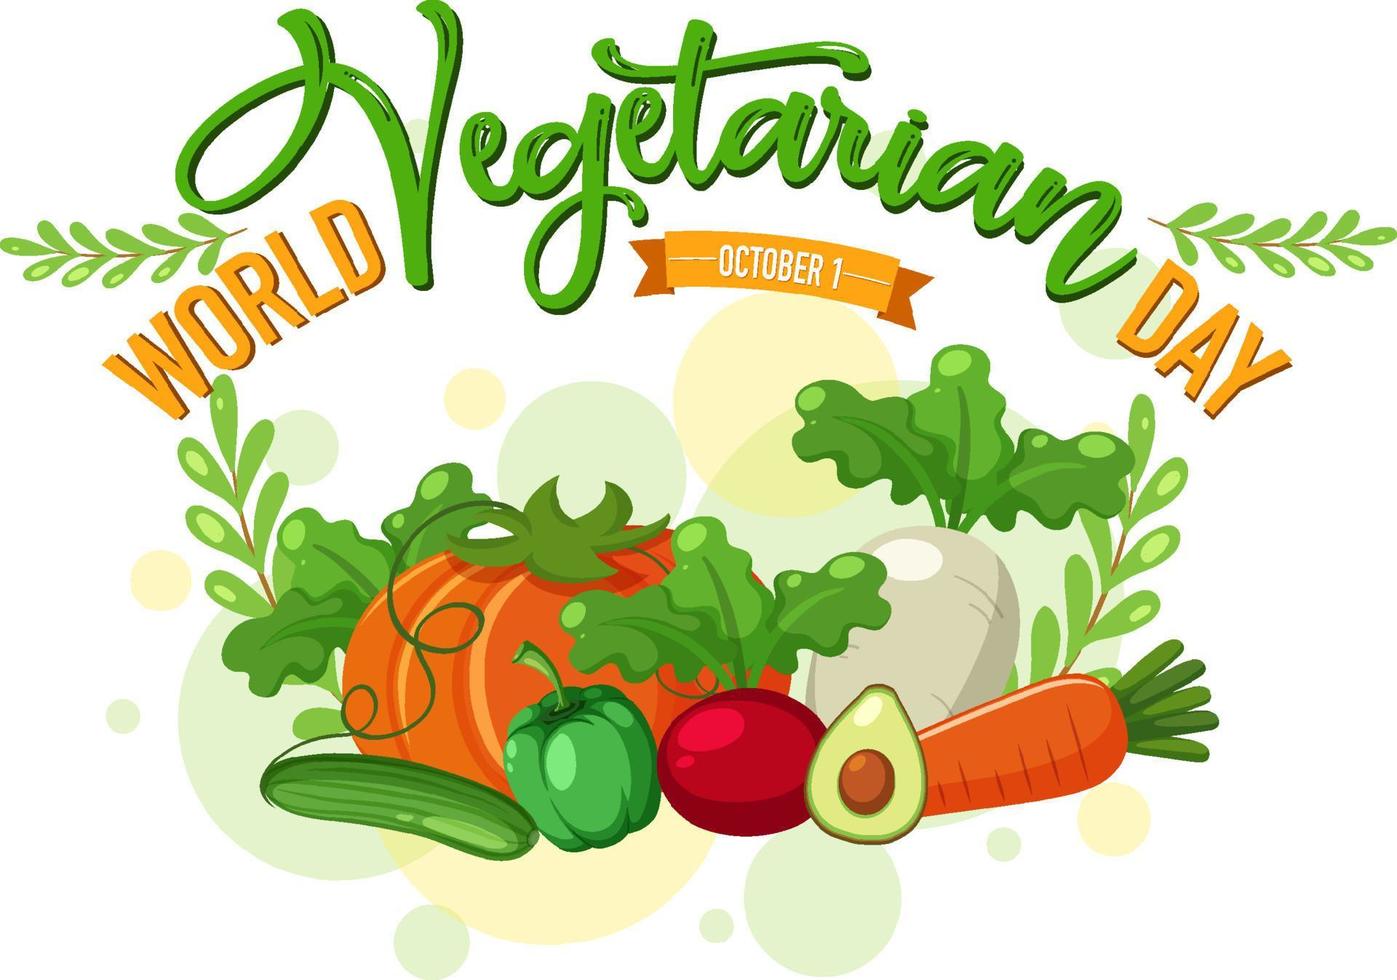 World Vegetarian Day logo with vegetable and fruit vector